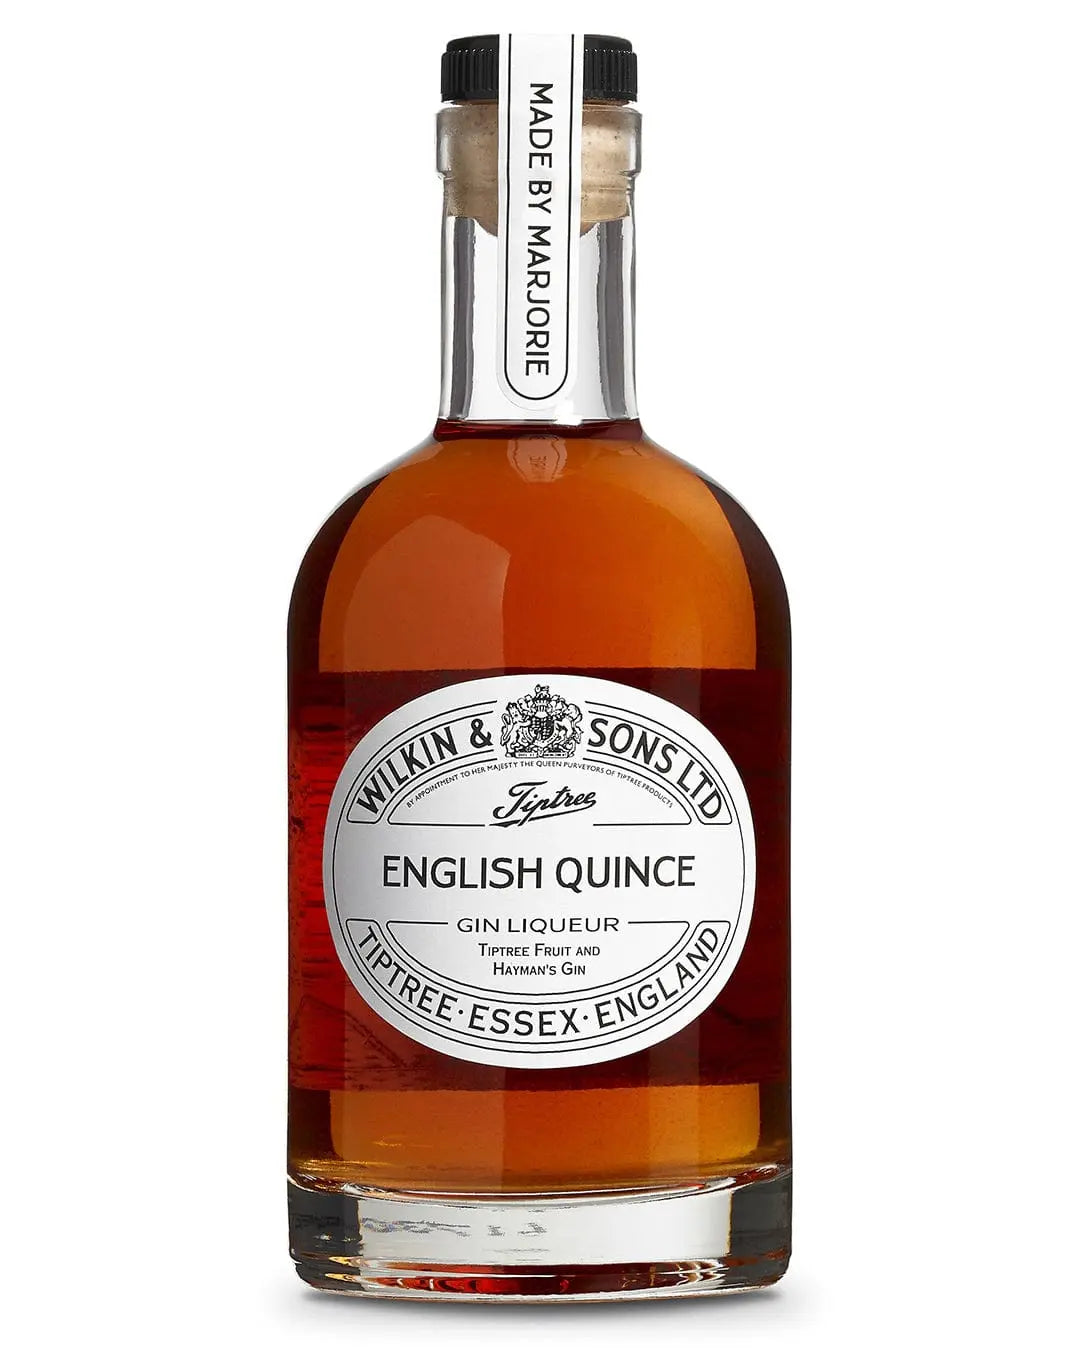 Tiptree English Quince Gin Liqueur, 35 cl Gin